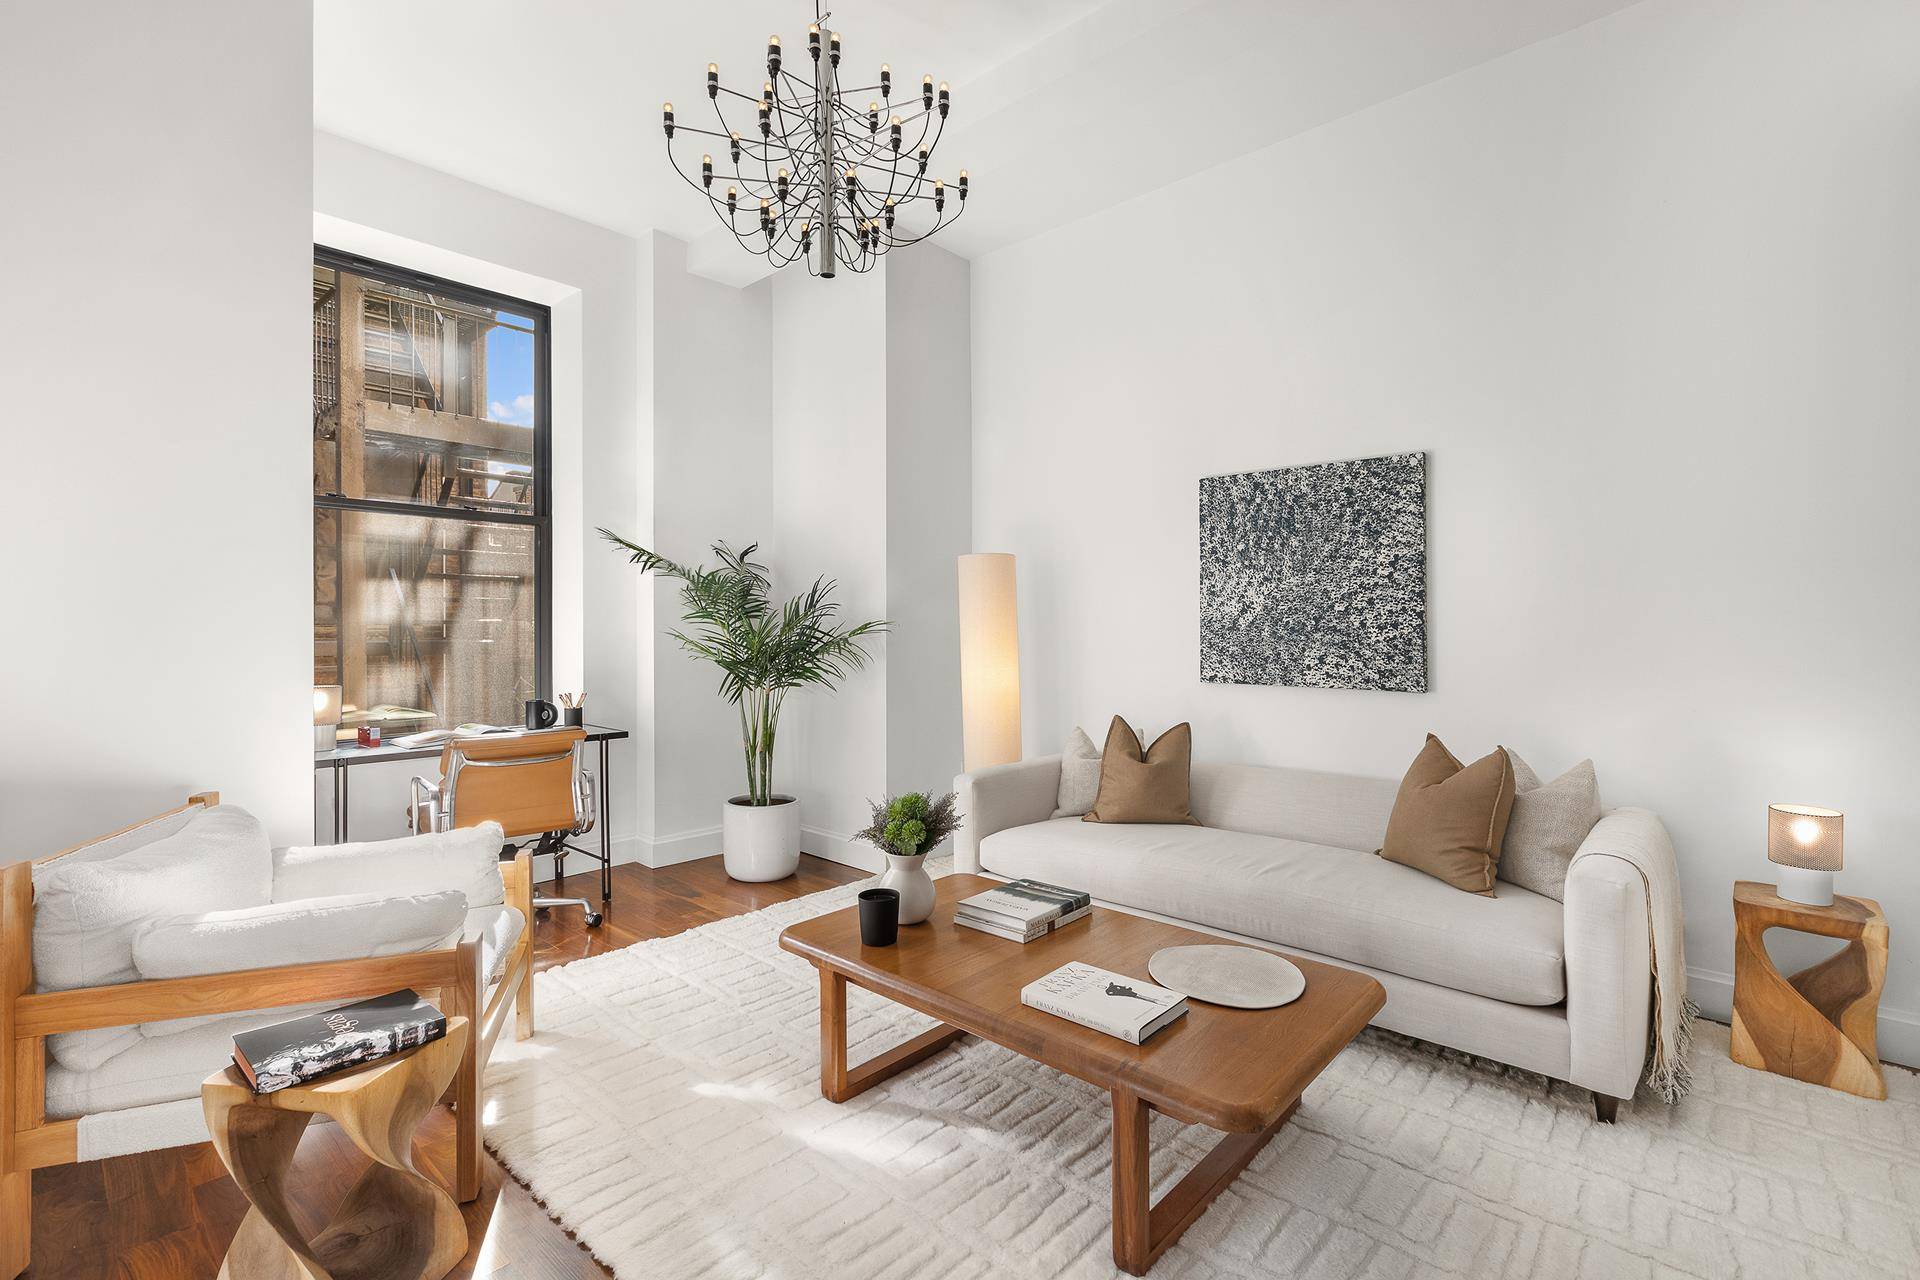 MINT CONDITION WITH SOARING 11 FT CEILINGSWalnut Hardwood Floors amp ; Oversized Windows This stunning loft residence in Chelsea, one of Manhattan's most coveted neighborhoods, is meticulously maintained and thoughtfully ...